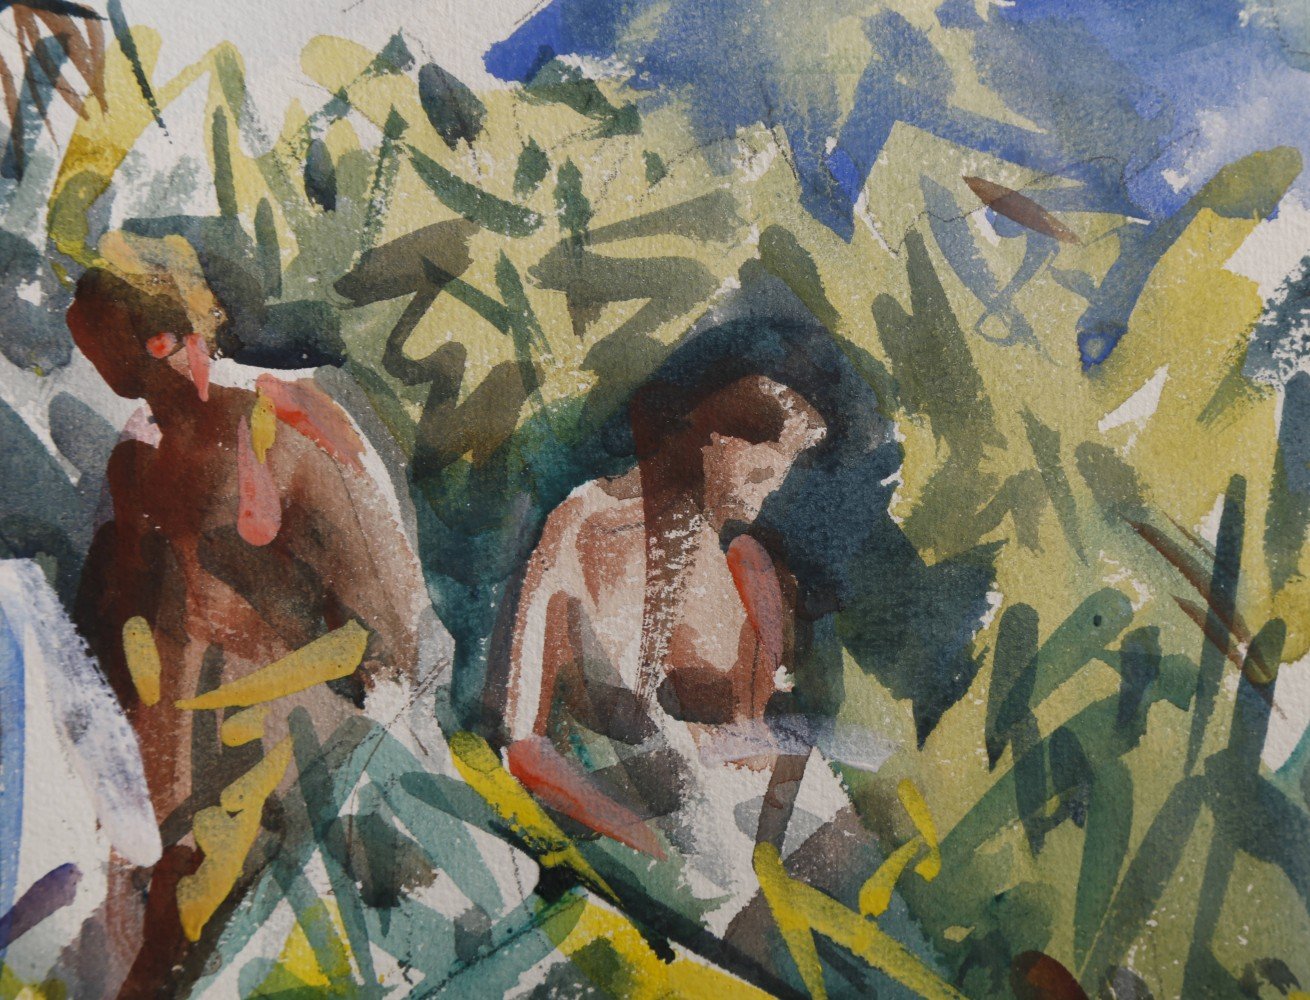 Figurative Watercolor and Graphite on Paper Painting: 